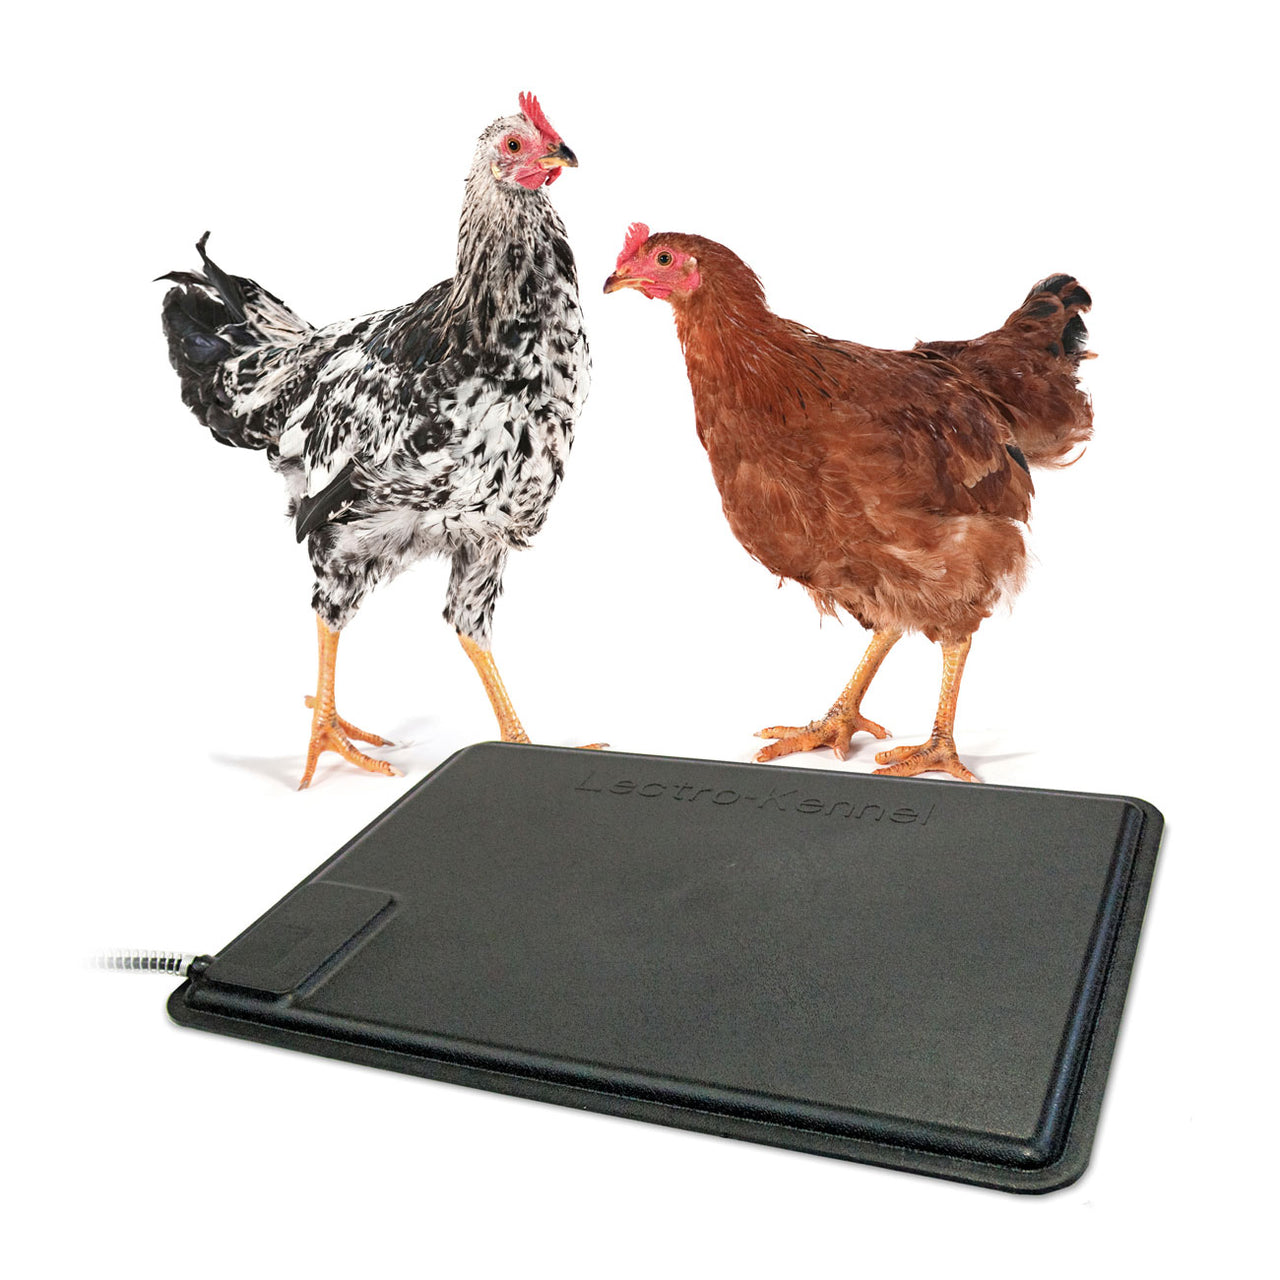 K&h Pet Products Thermo-Chicken Heated Pad - K&h Pet Products - Canada